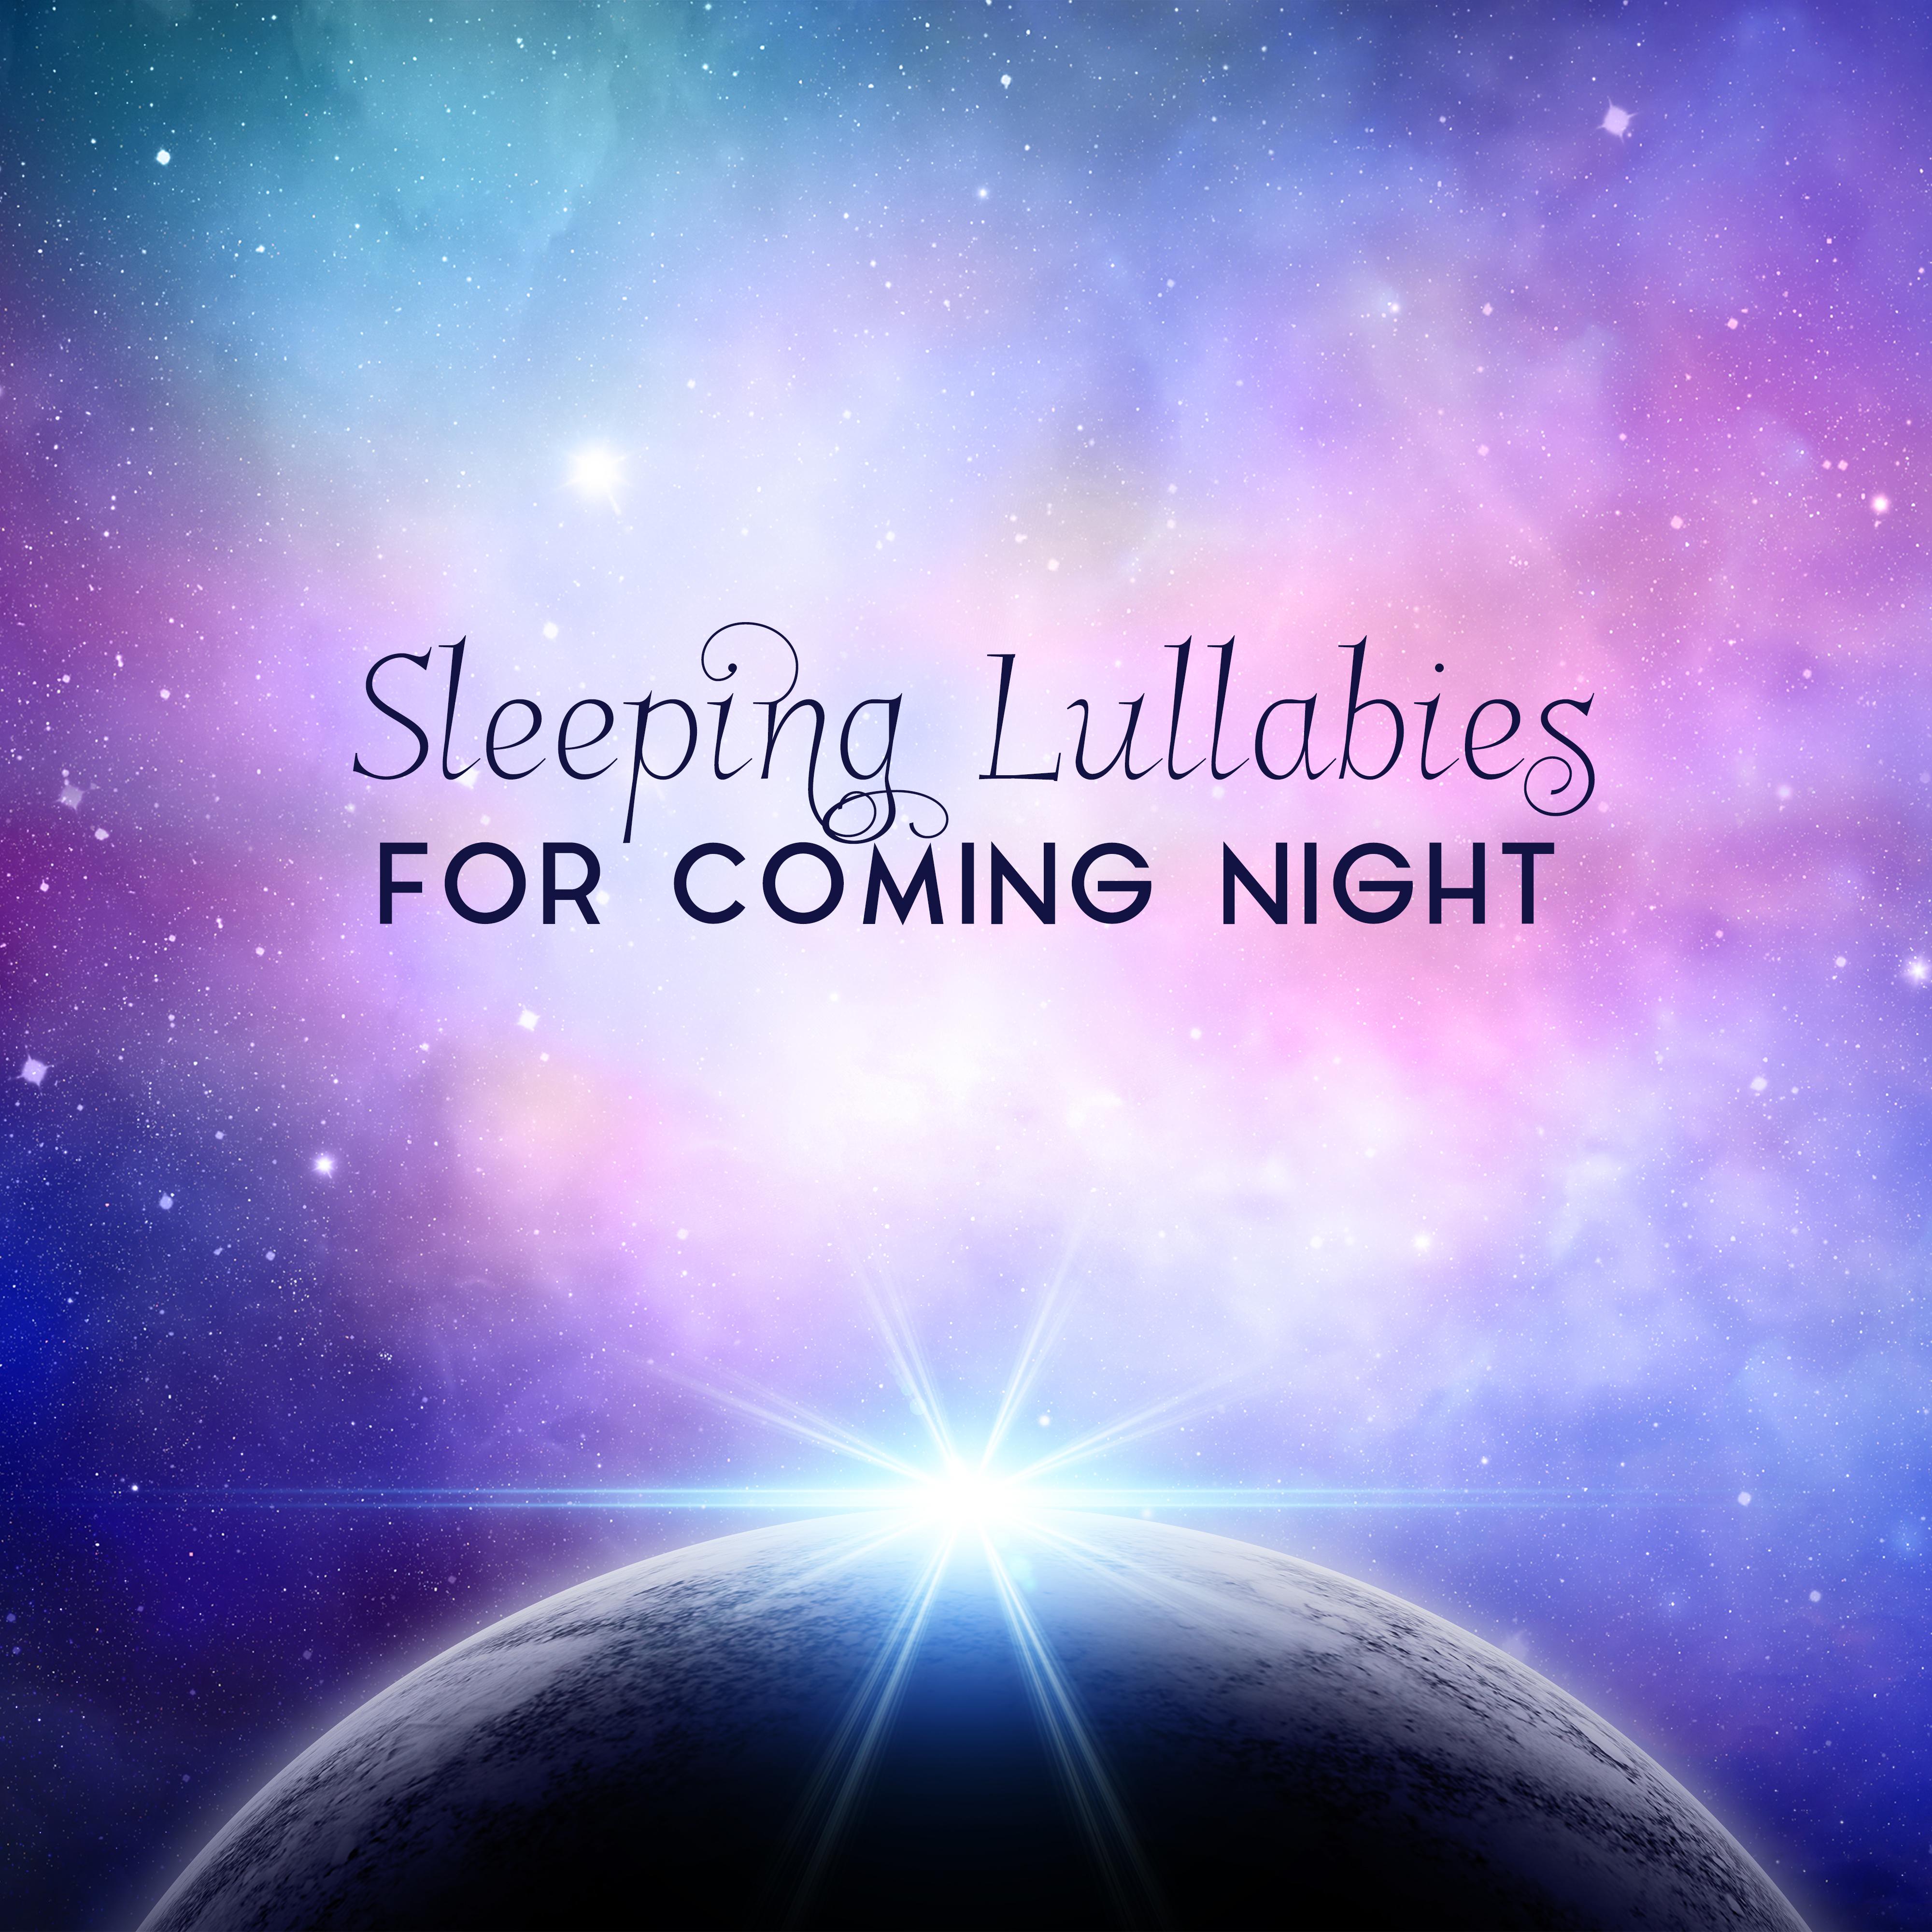 Sleeping Lullabies for Coming Night: Soft New Age 2019 Music, Perfect Sounds for Sleep, Relax After Long Day, Full Calm Down, Rest All Night Long